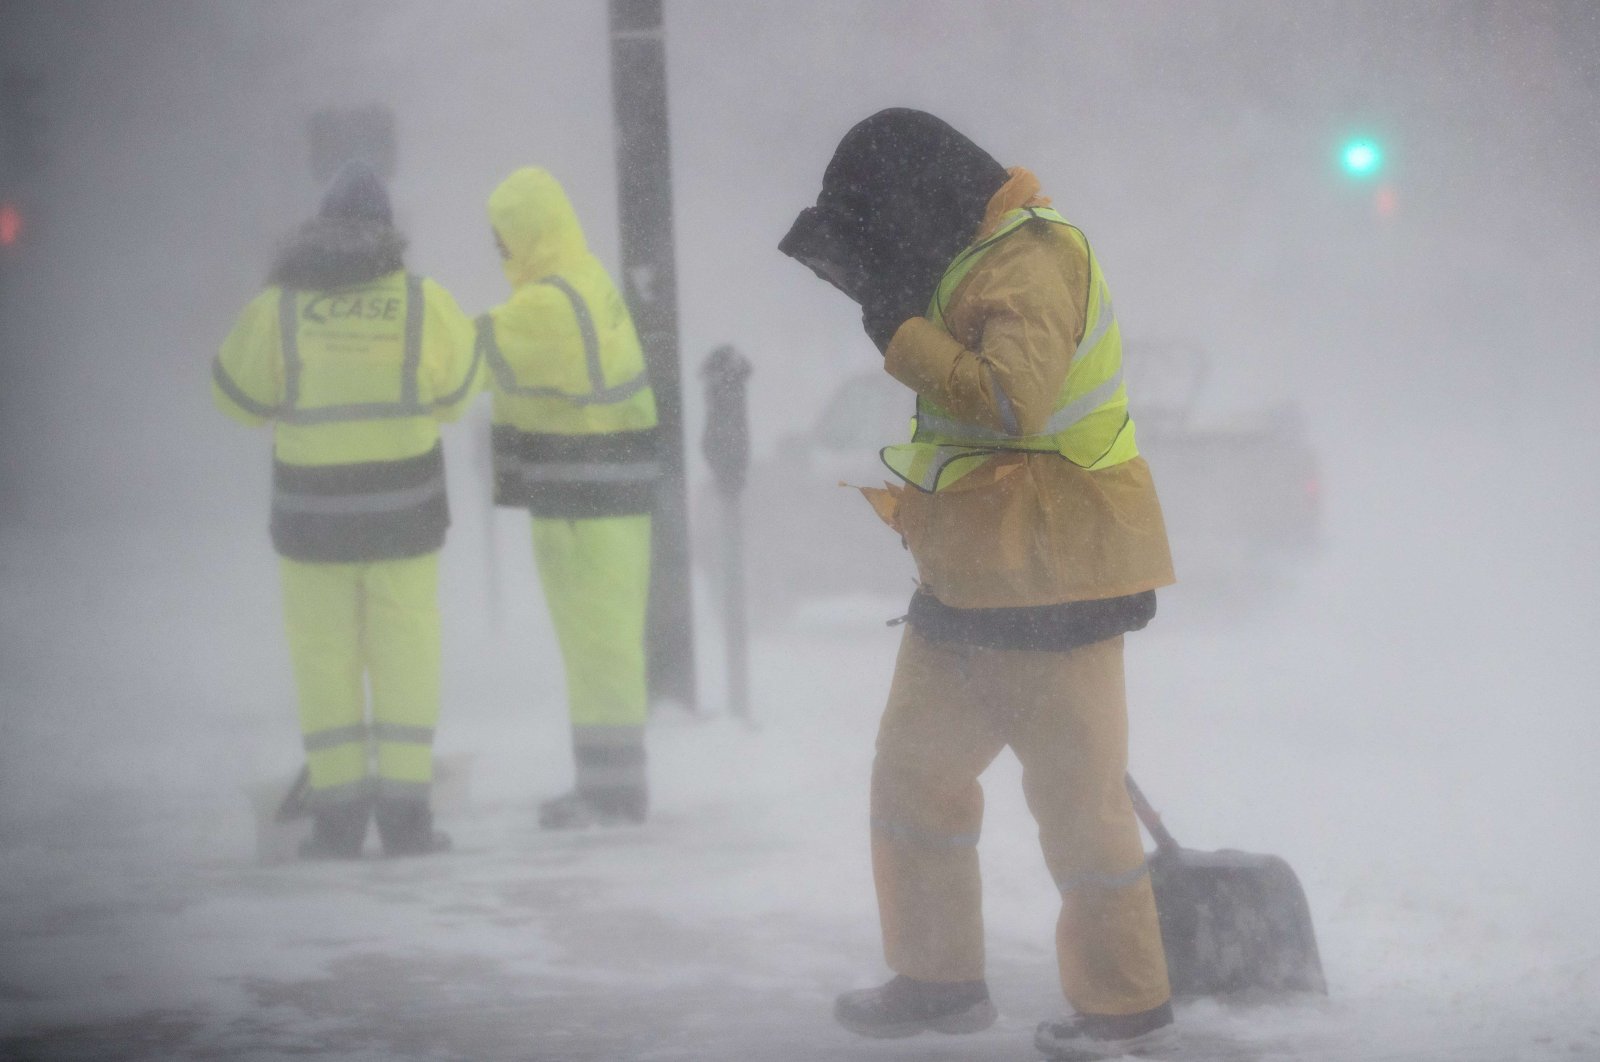 A worker shields himself from blowing snow and wind as Winter Storm Kenan bears down on Boston, Massachusetts, U.S., Jan. 29, 2022. (Getty Images / AFP)